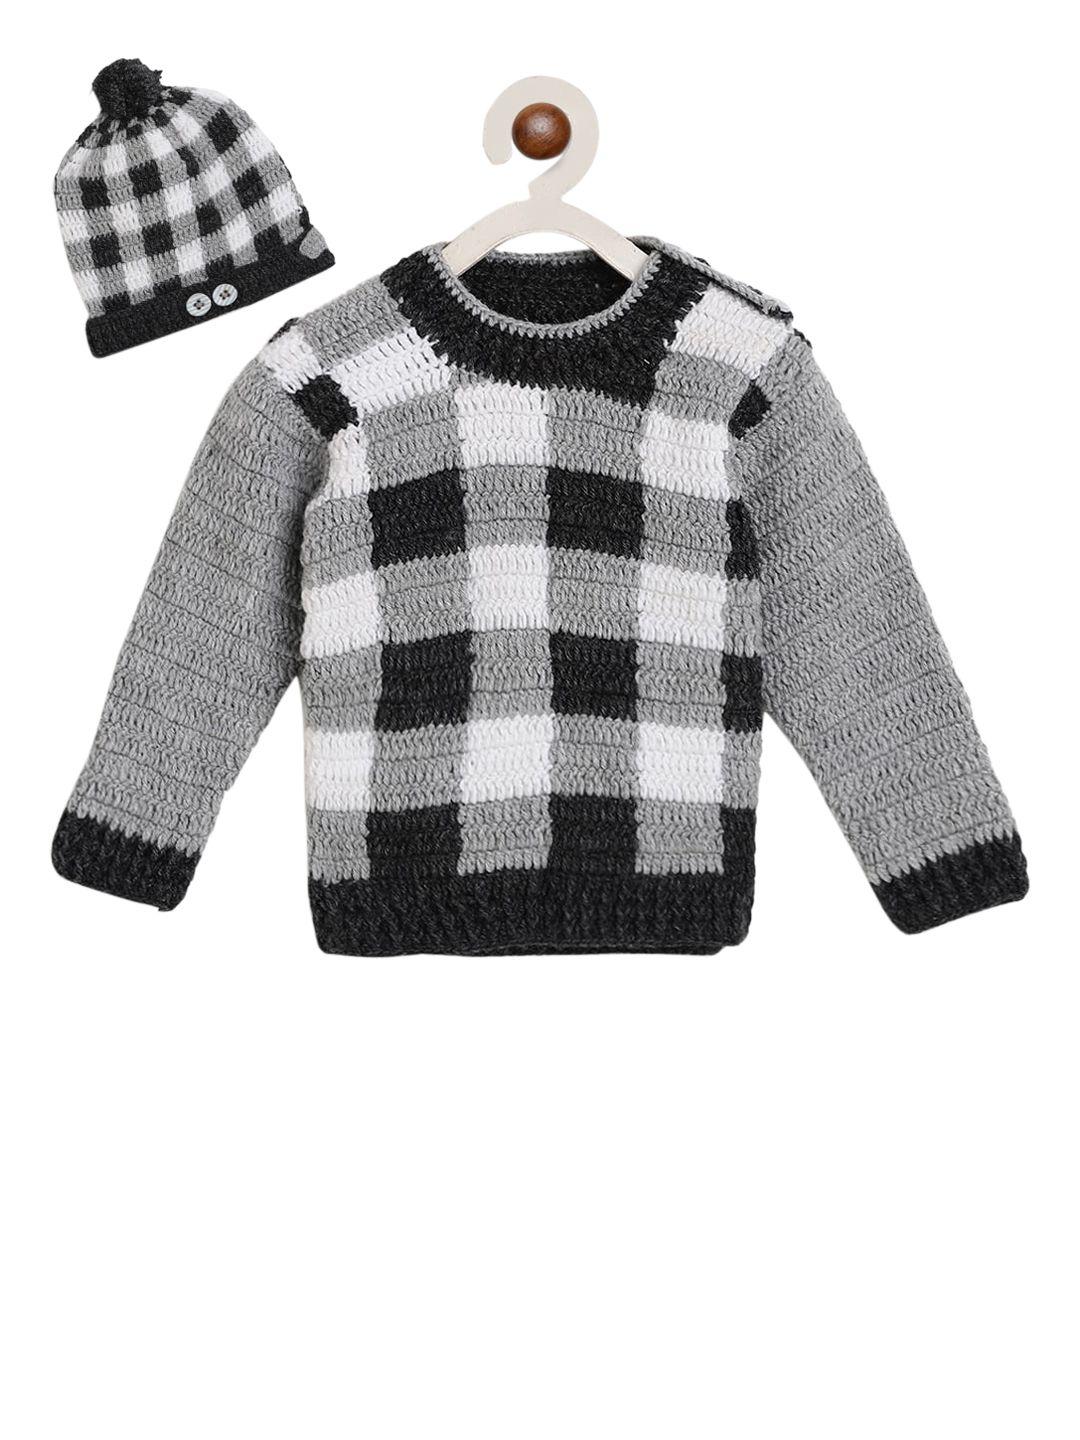 chutput unisex kids grey & black checked hand knitted crochet pullover sweater with beanie